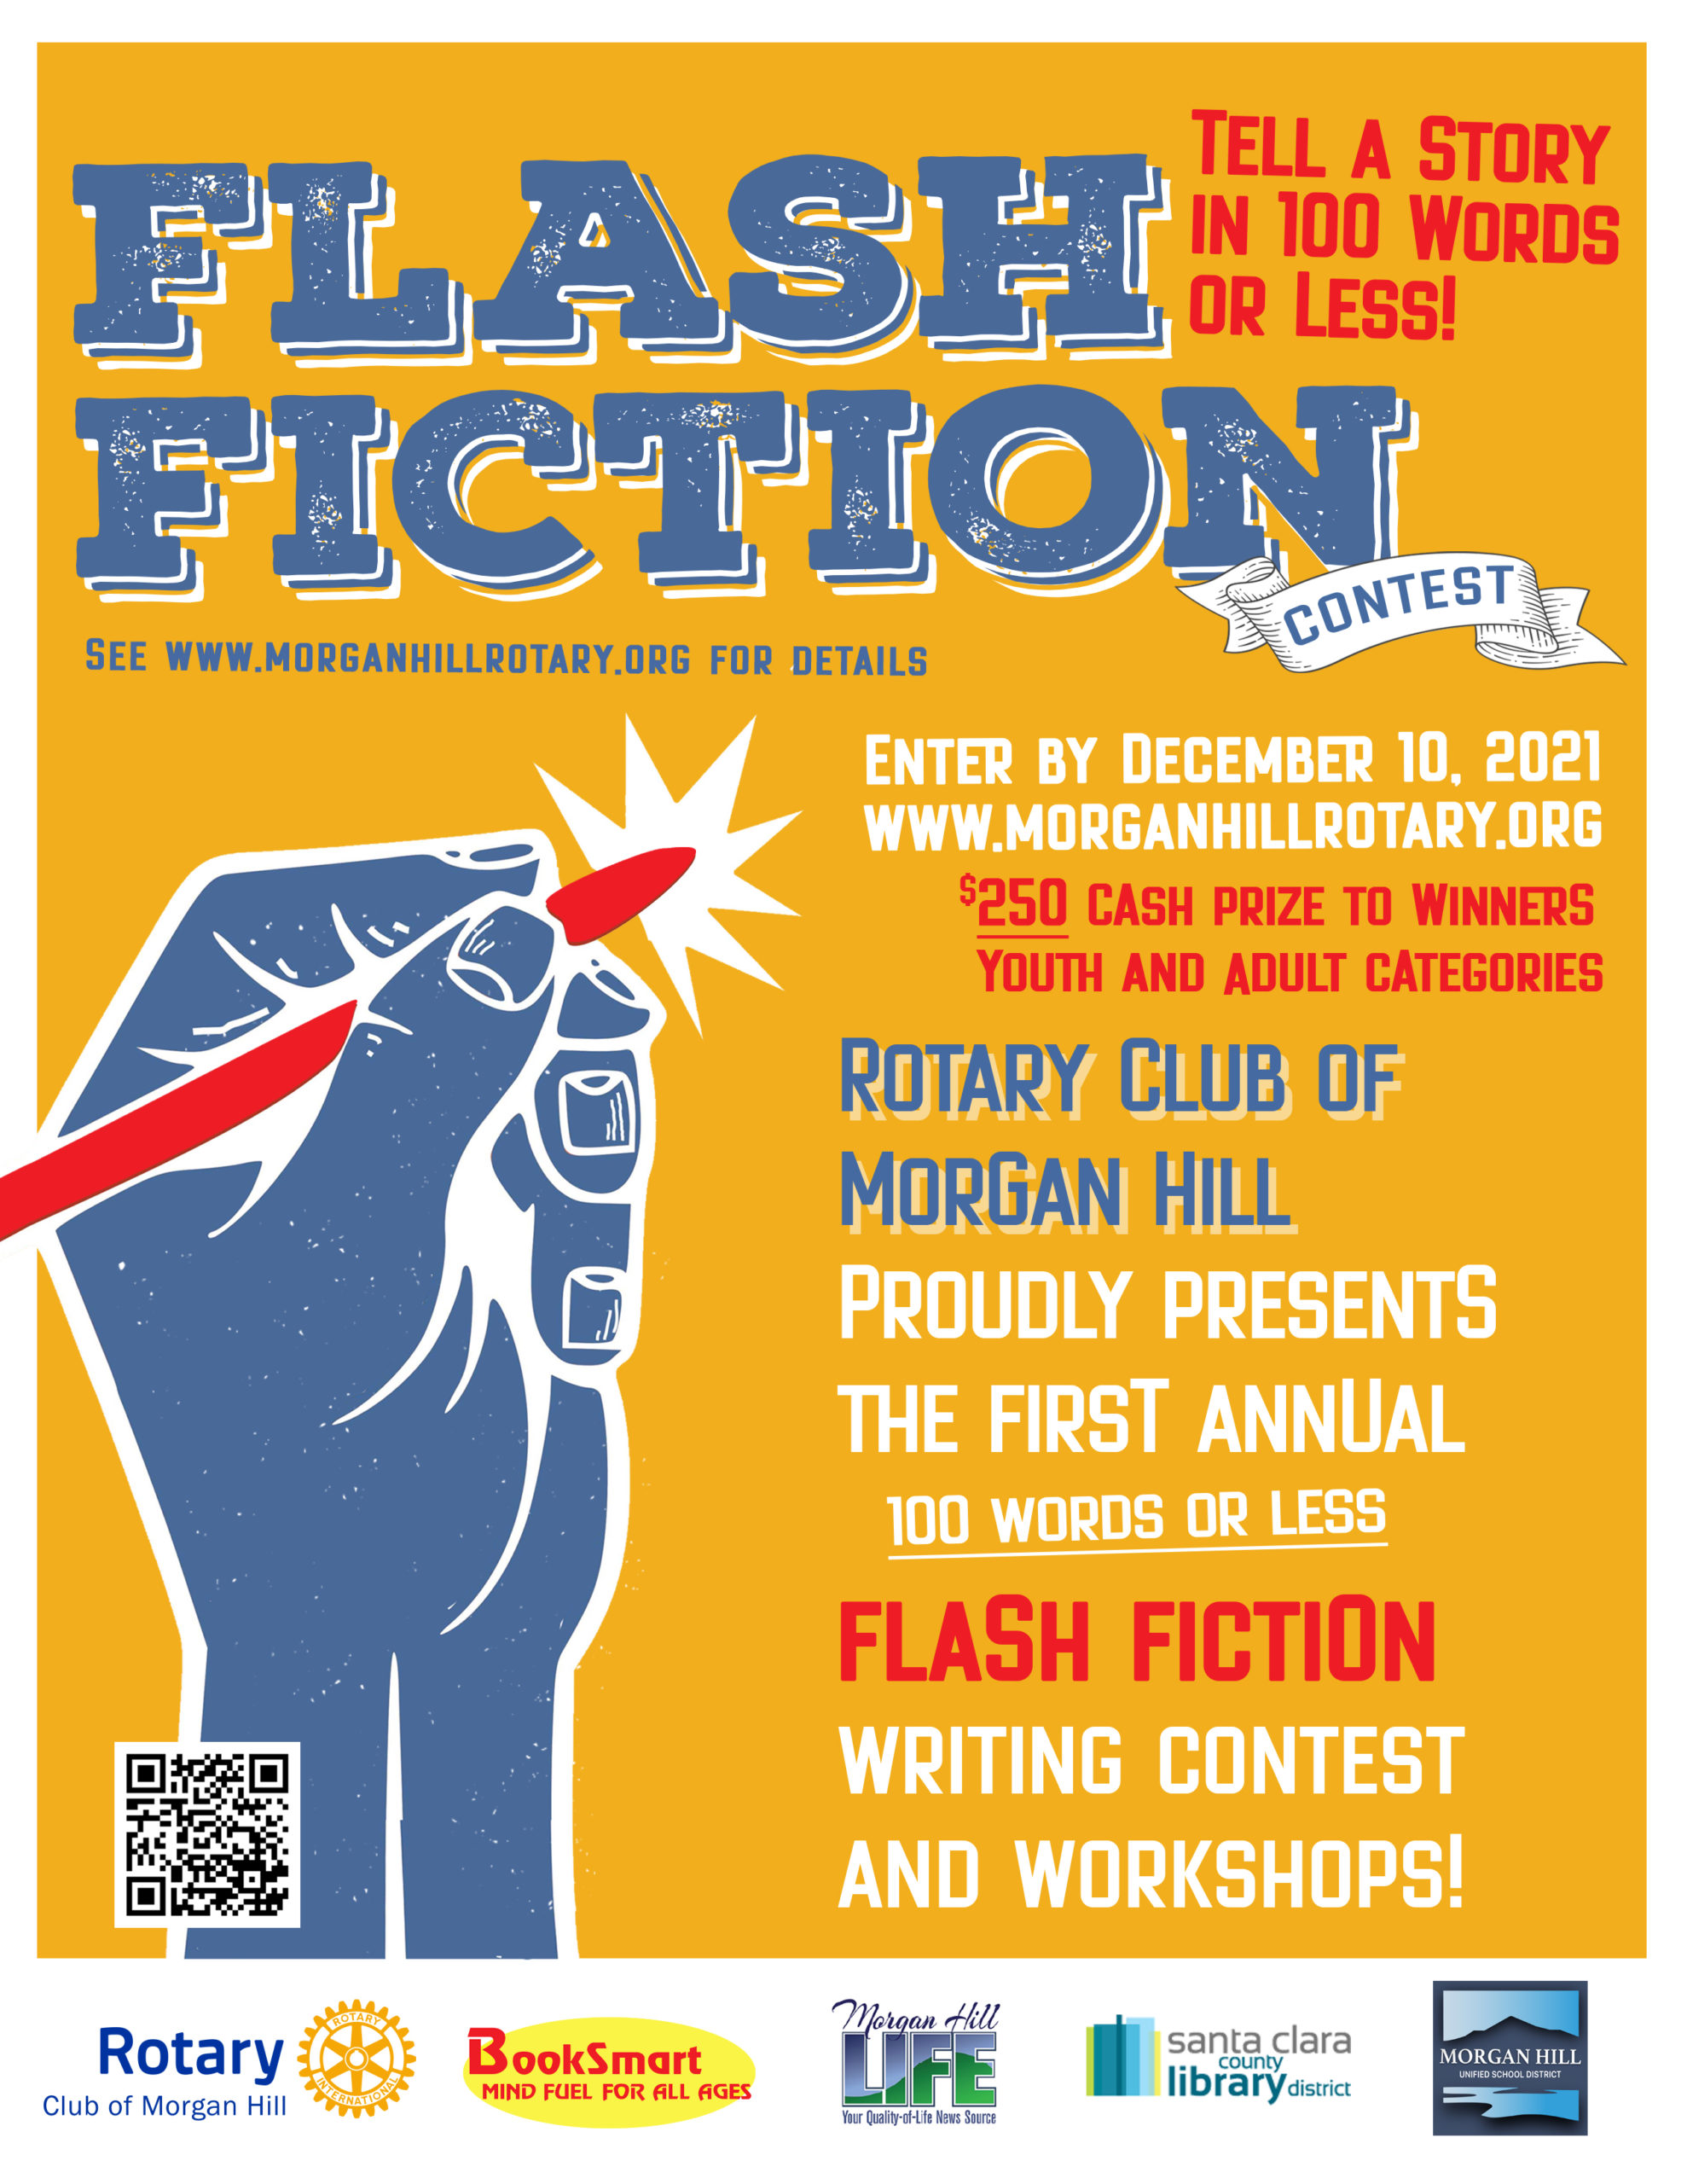 Editorial Rotary's flash fiction contest encourages creativity